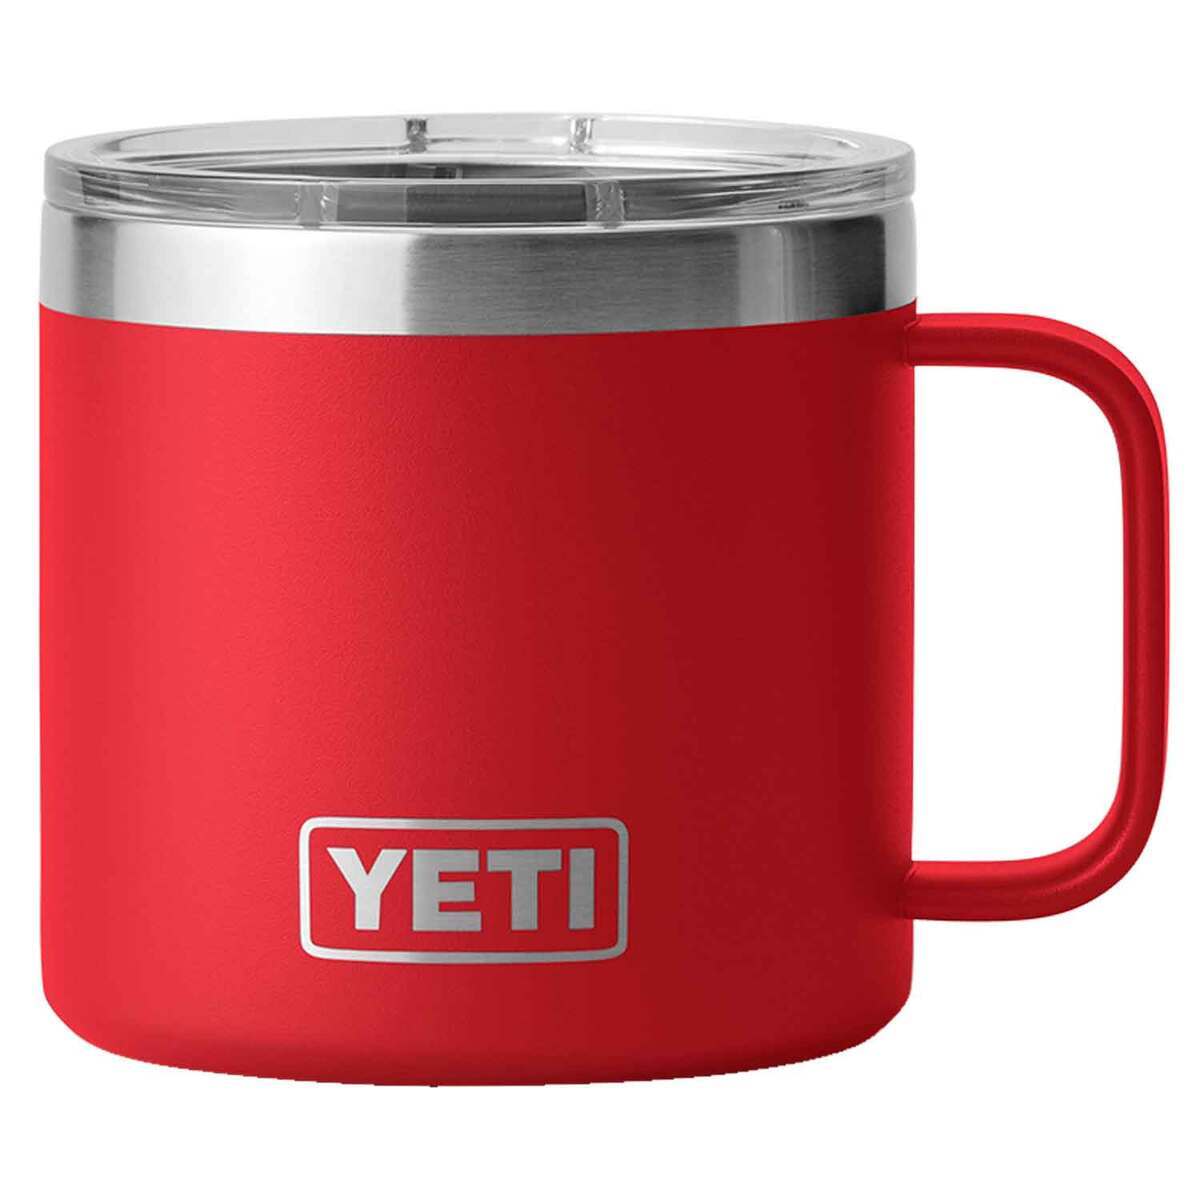 2pack Screw-on Straw Lid, Fit YETI Stronghold 20 oz Travel Mug ONLY